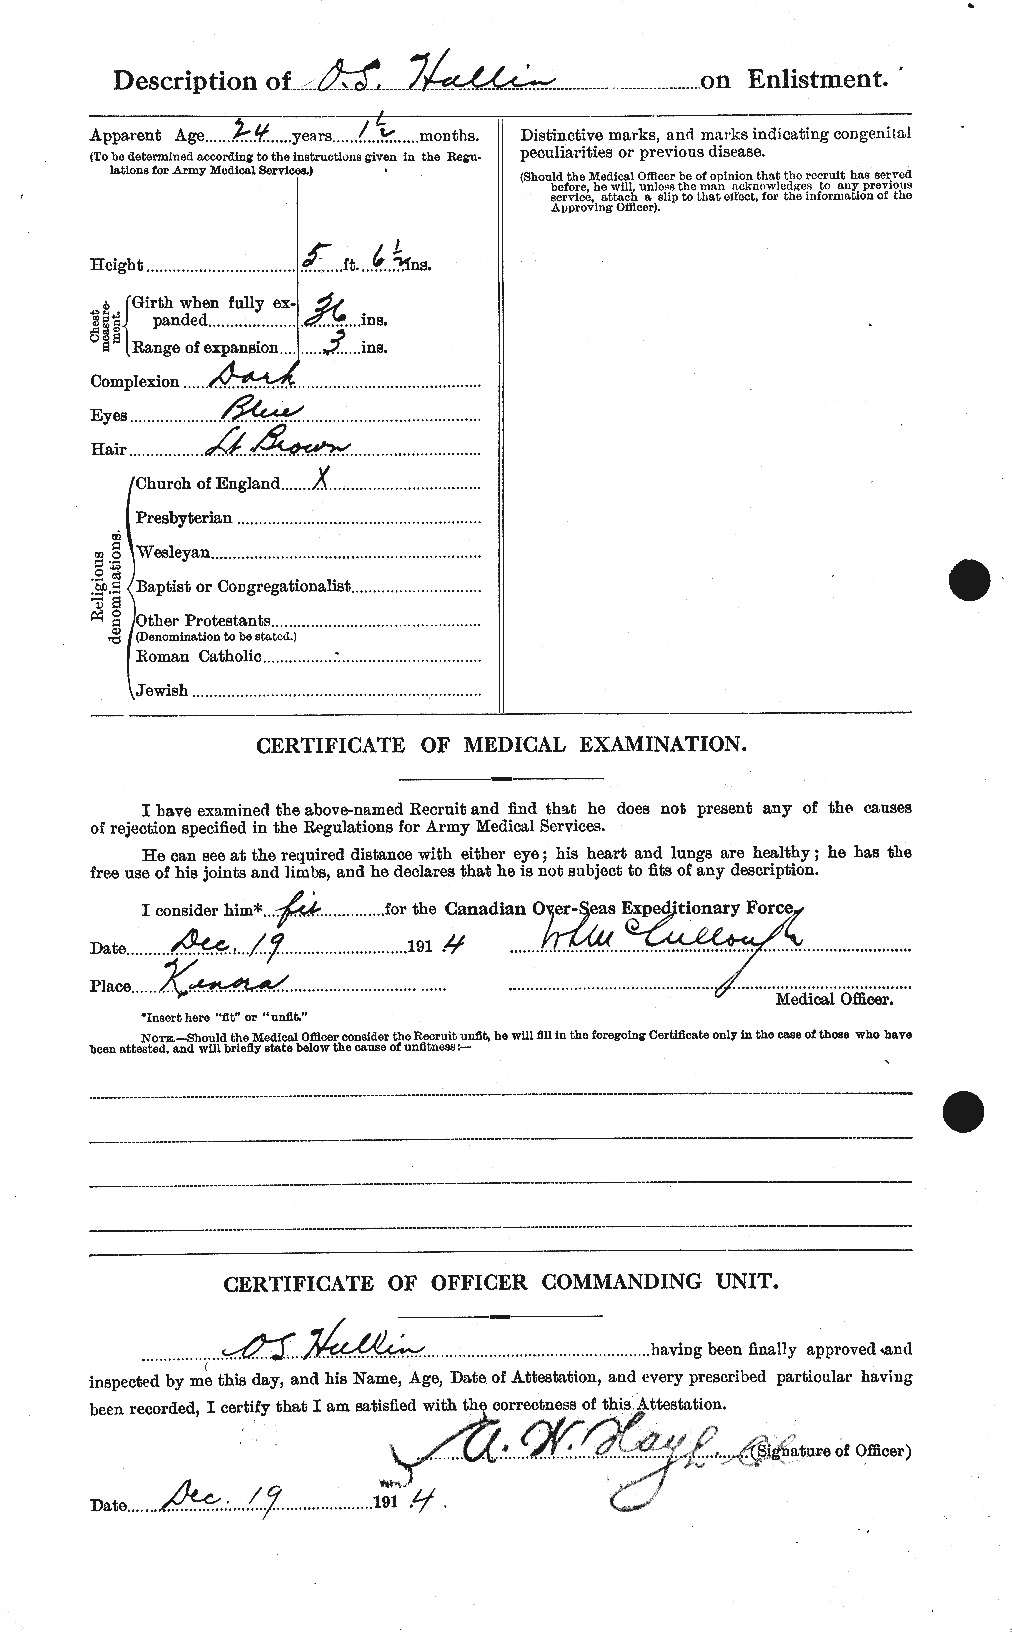 Personnel Records of the First World War - CEF 407084b